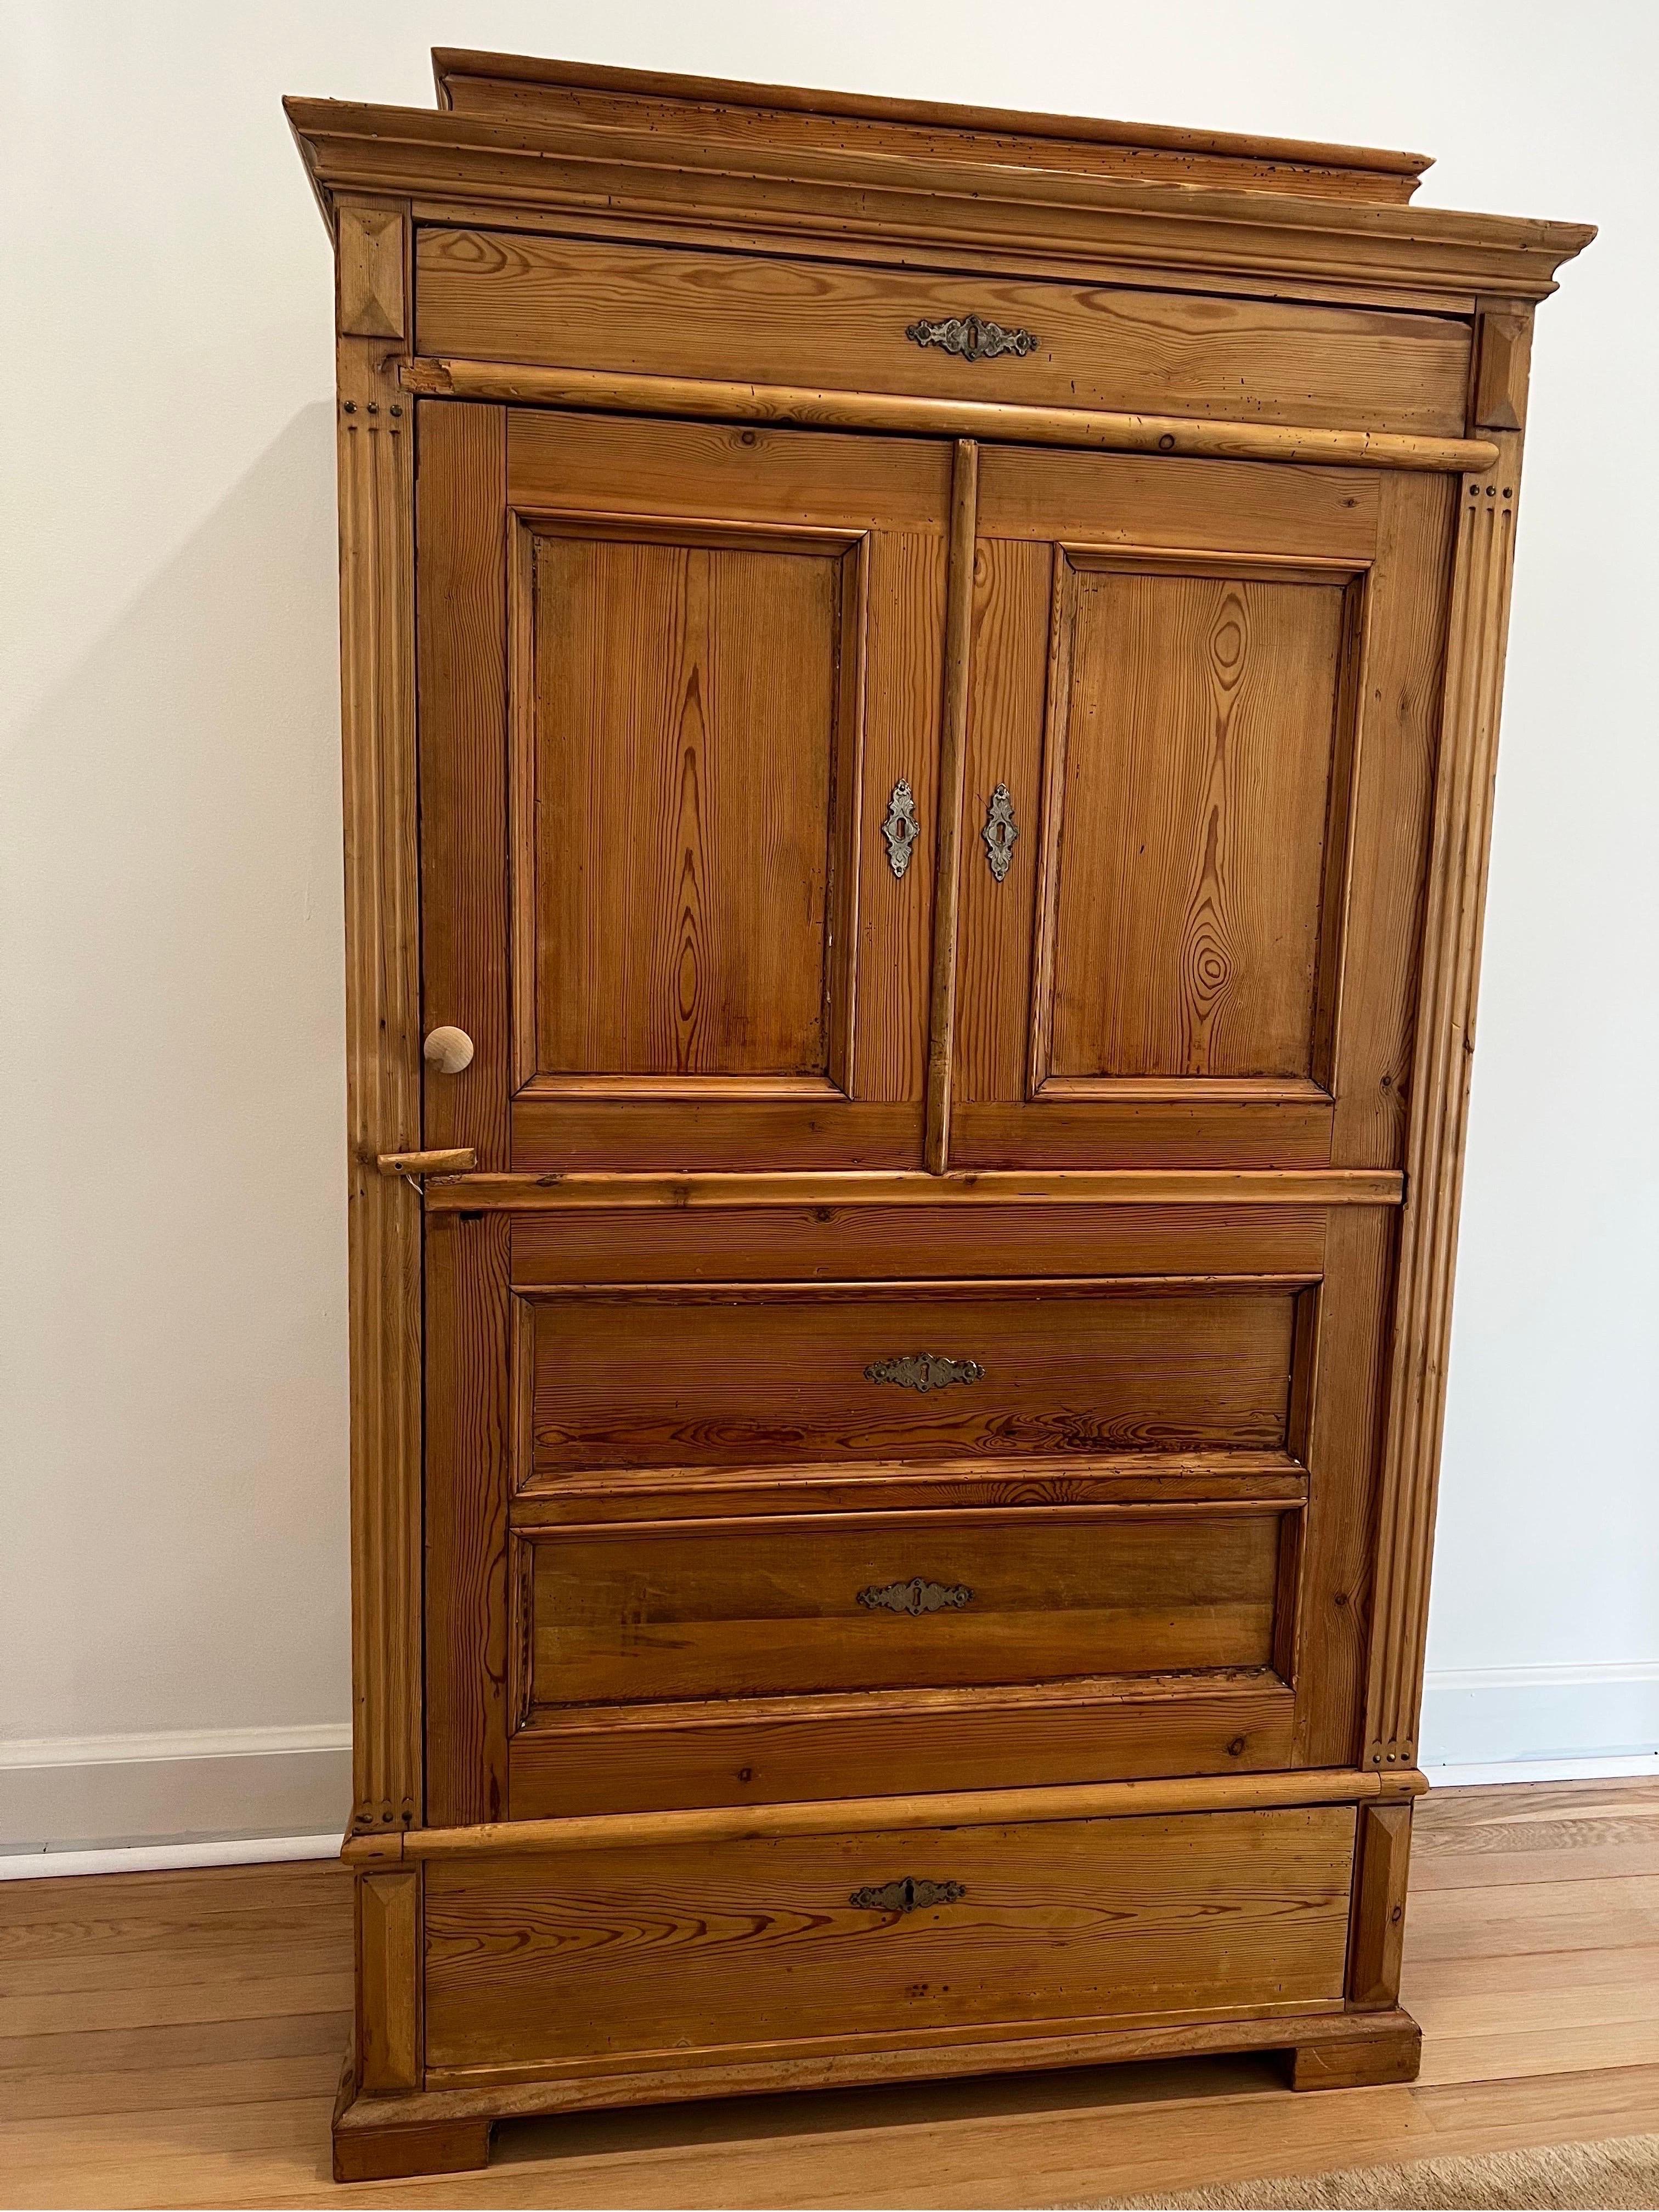 Antique pine cabinet. Removable shelves inside make it great for linen storage or cupboard. 
Clean lines and warm waxed pine are the hallmarks of this lovely armoire. Known as a 